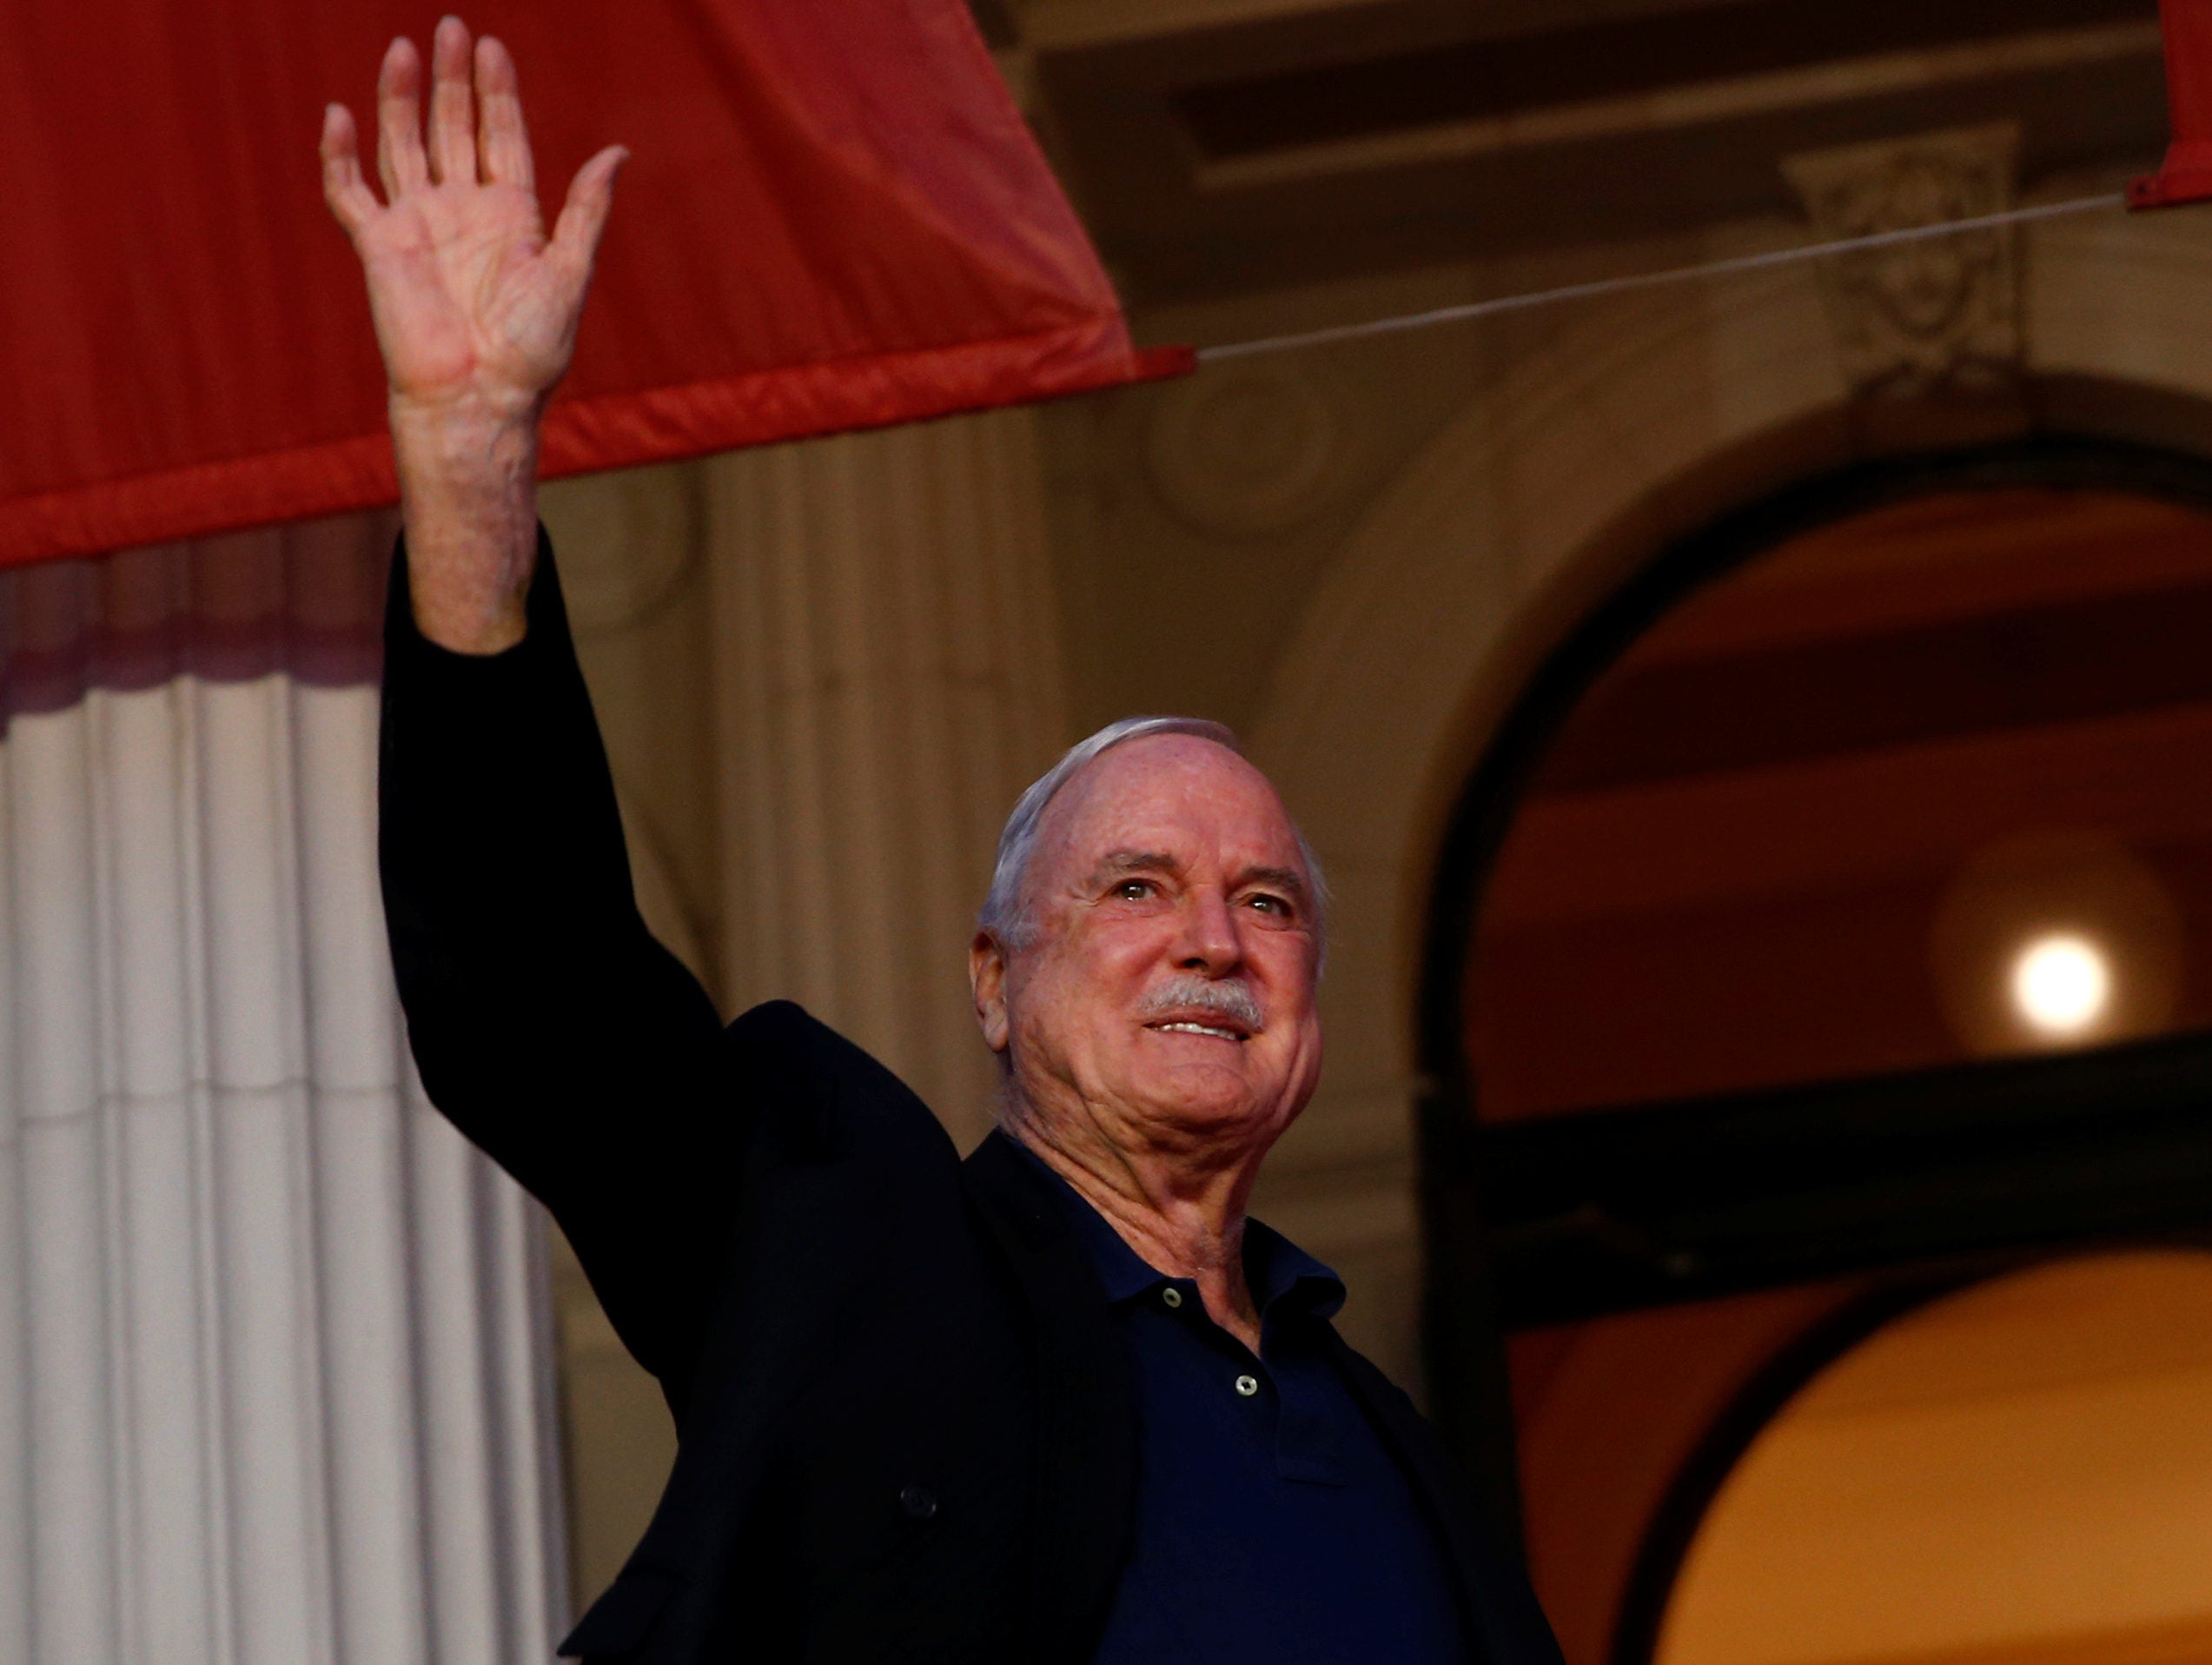 Hacked Off supporter John Cleese points finger at 'lying' and 'right-wing' UK press in decision to leave Britain for the Caribbean